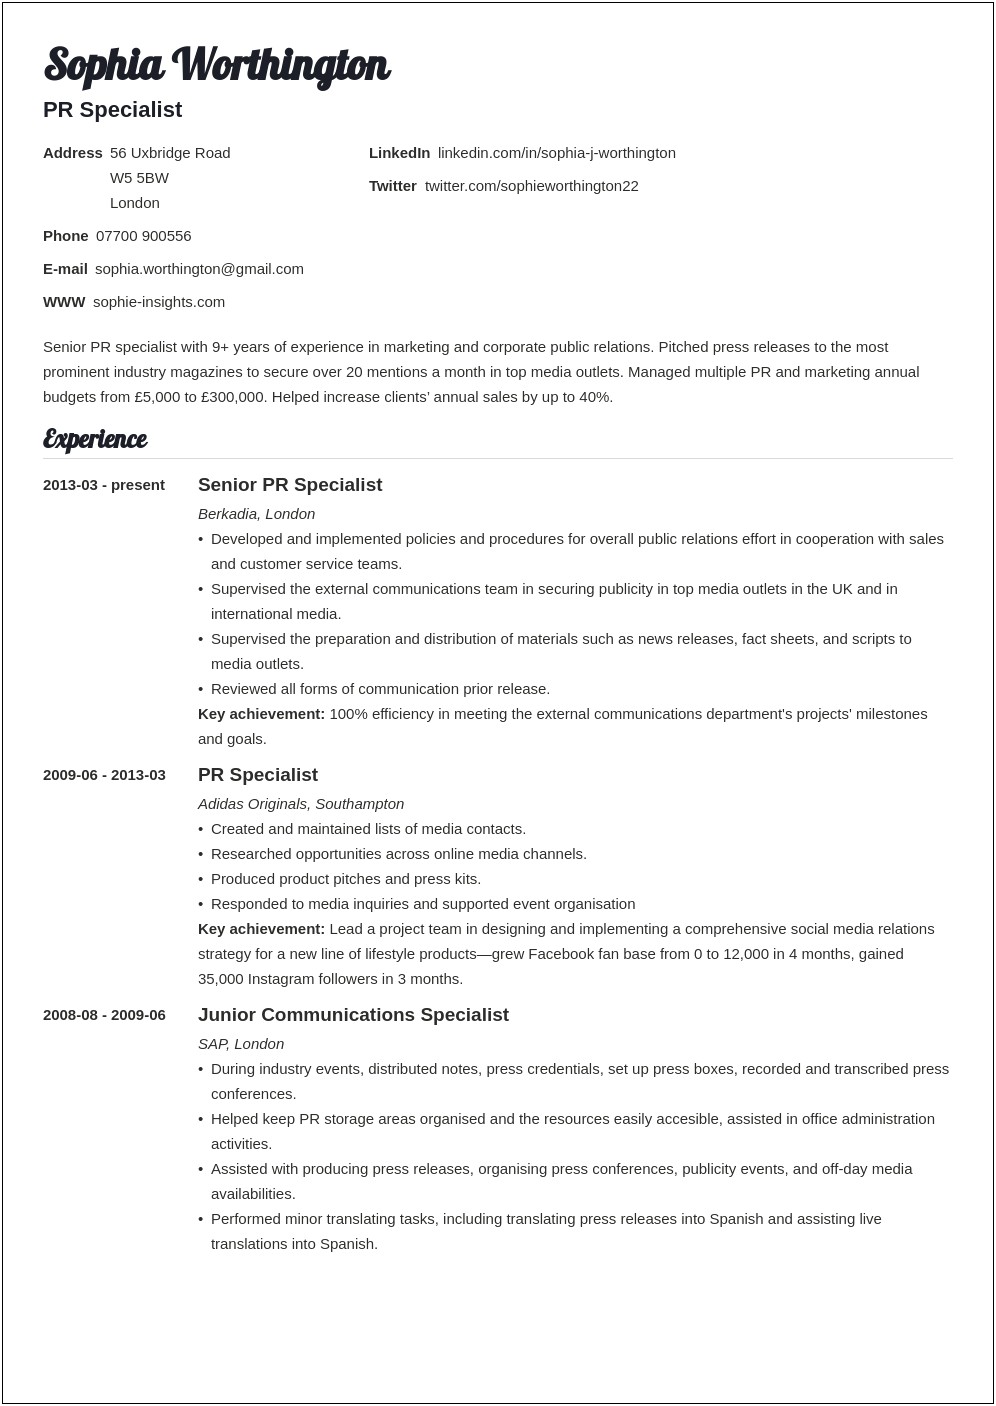 Crearing A Resume.for Specific Job